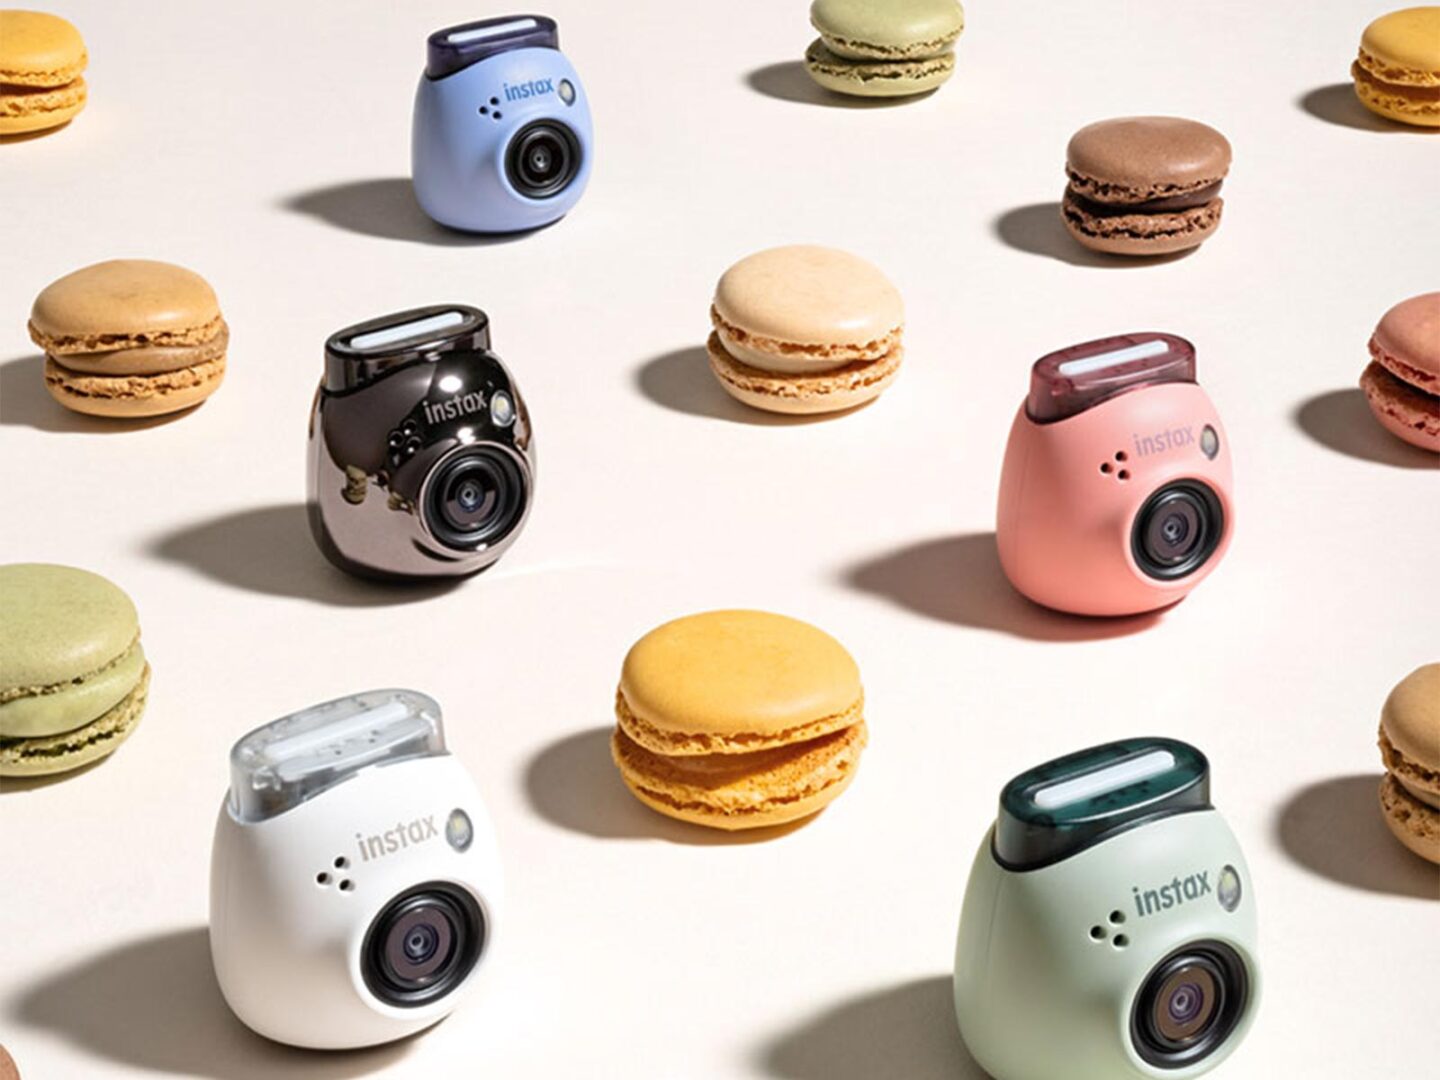 INSTAX Pal is Fujifilm’s new camera that fits in the palm of your hand